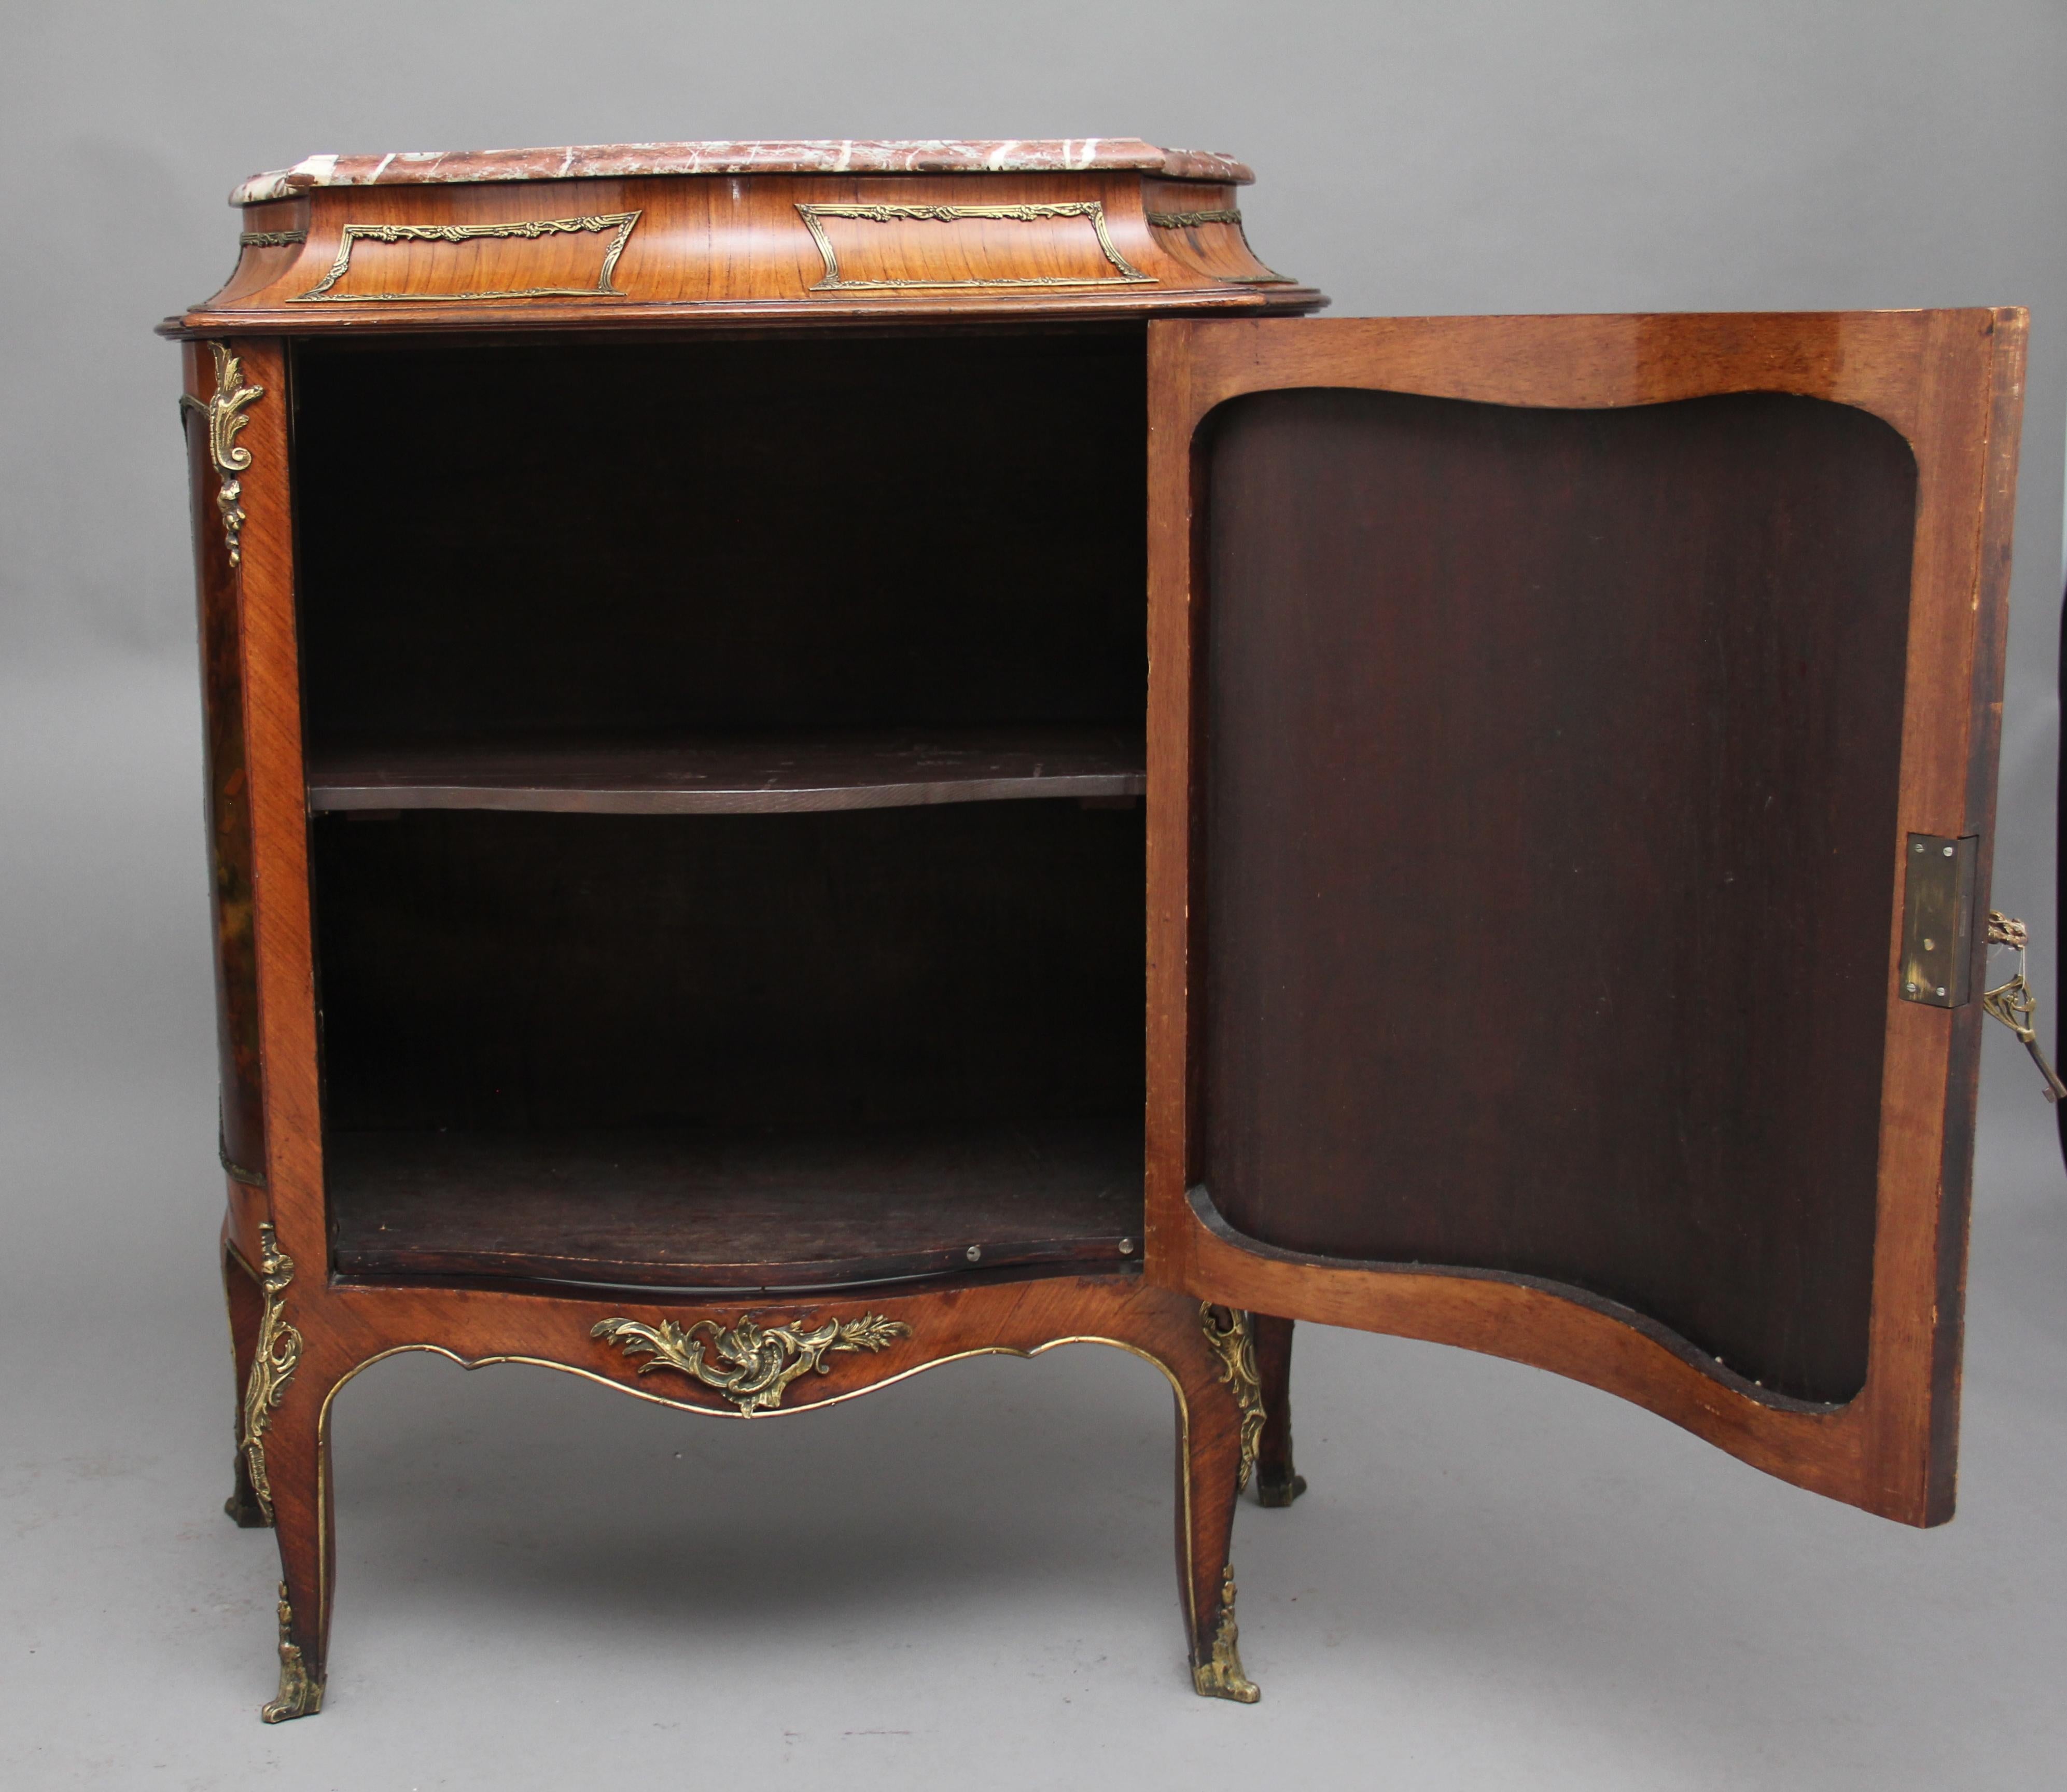 19th century French Kingwood and brass-mounted marble top cabinet, having the original red and white moulded edge and shaped marble top above a shaped frieze with lovely quality brass rectangular mouldings, the front and sides of the cabinet having